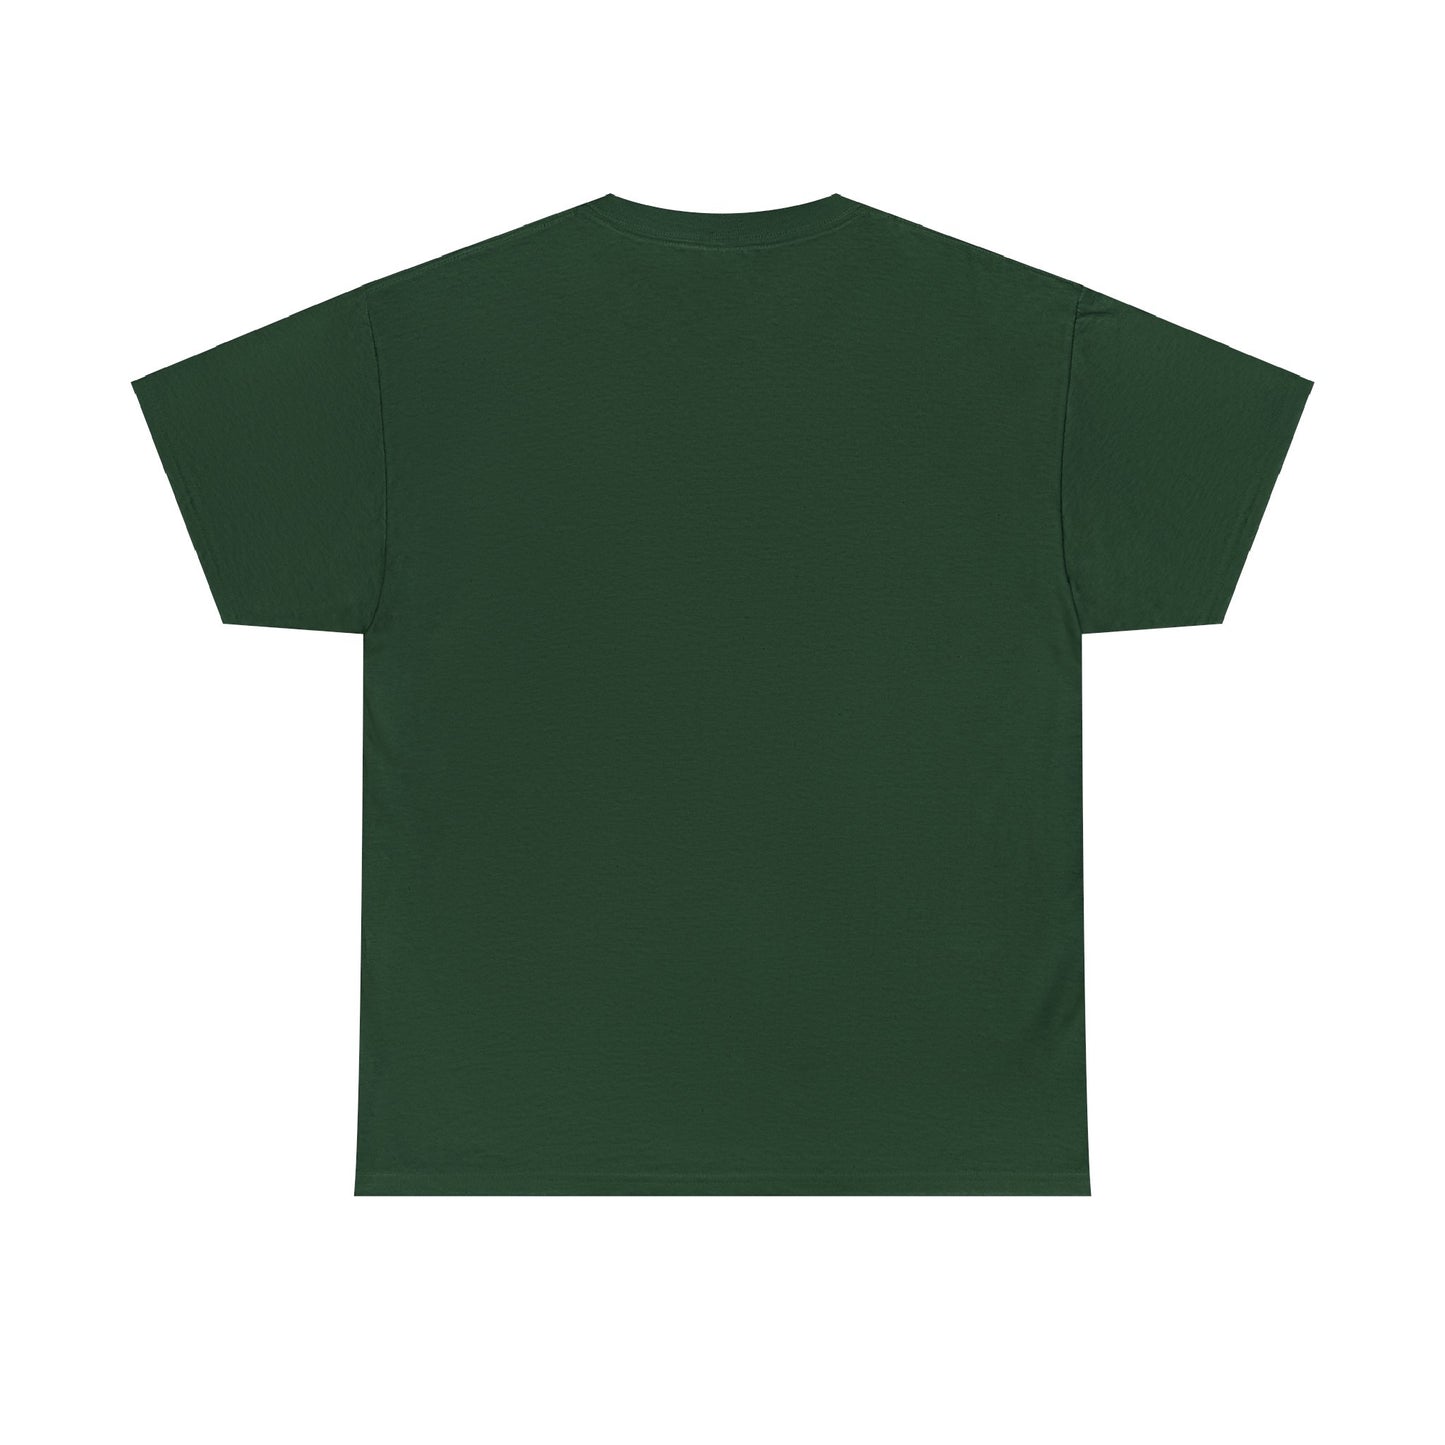 Sorry. Cant. Packers. Bye.  - Unisex Heavy Cotton Tee